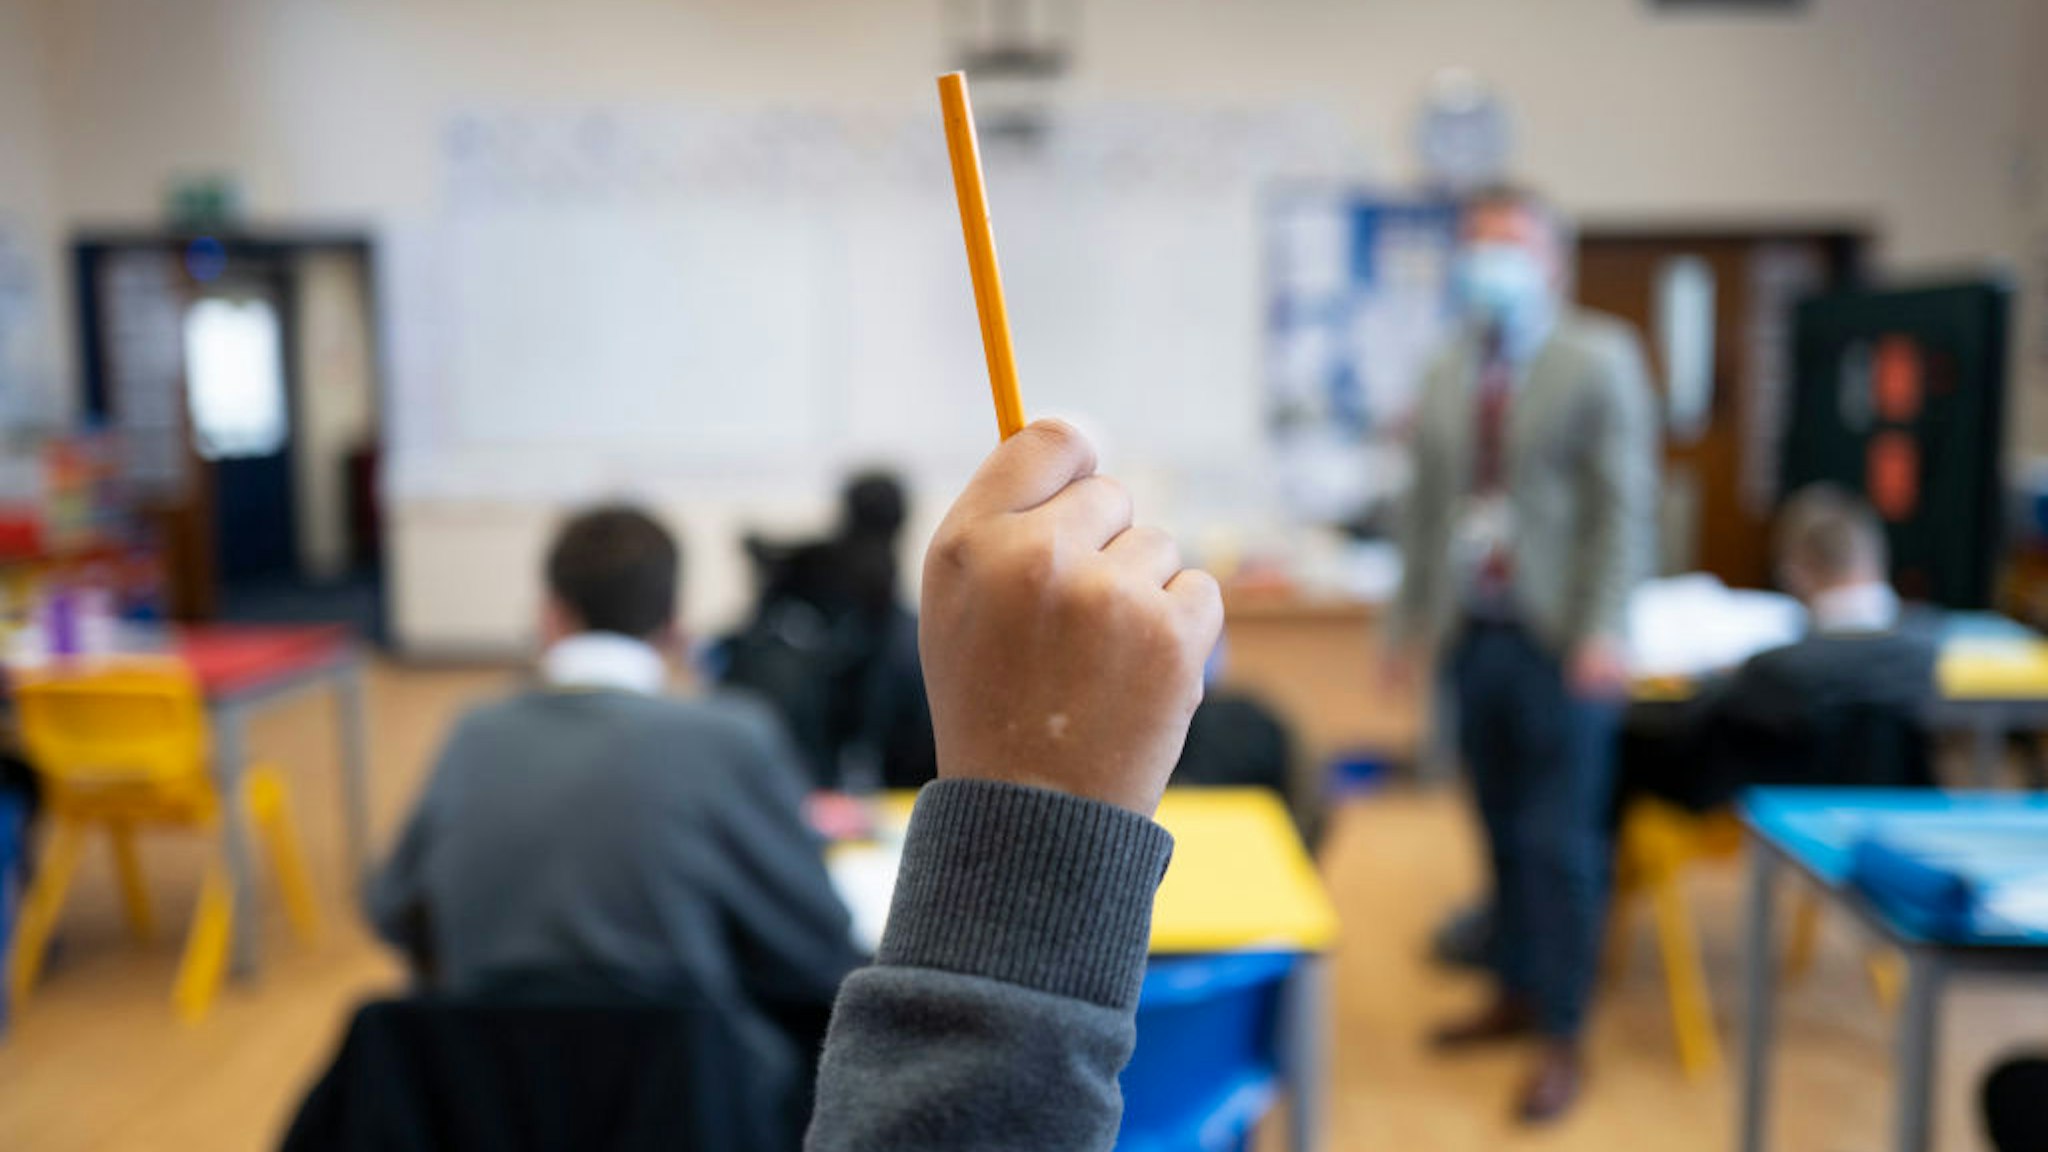 CARDIFF, WALES - SEPTEMBER 14: A pupil raises their hand during a lesson at Whitchurch High School on September 14, 2021 in Cardiff, Wales. All children aged 12 to 15 across the UK will be offered a dose of the Pfizer-BioNTech Covid-19 vaccine. Parental consent will be sought for the schools-based vaccination programme. (Photo by Matthew Horwood/Getty Images)